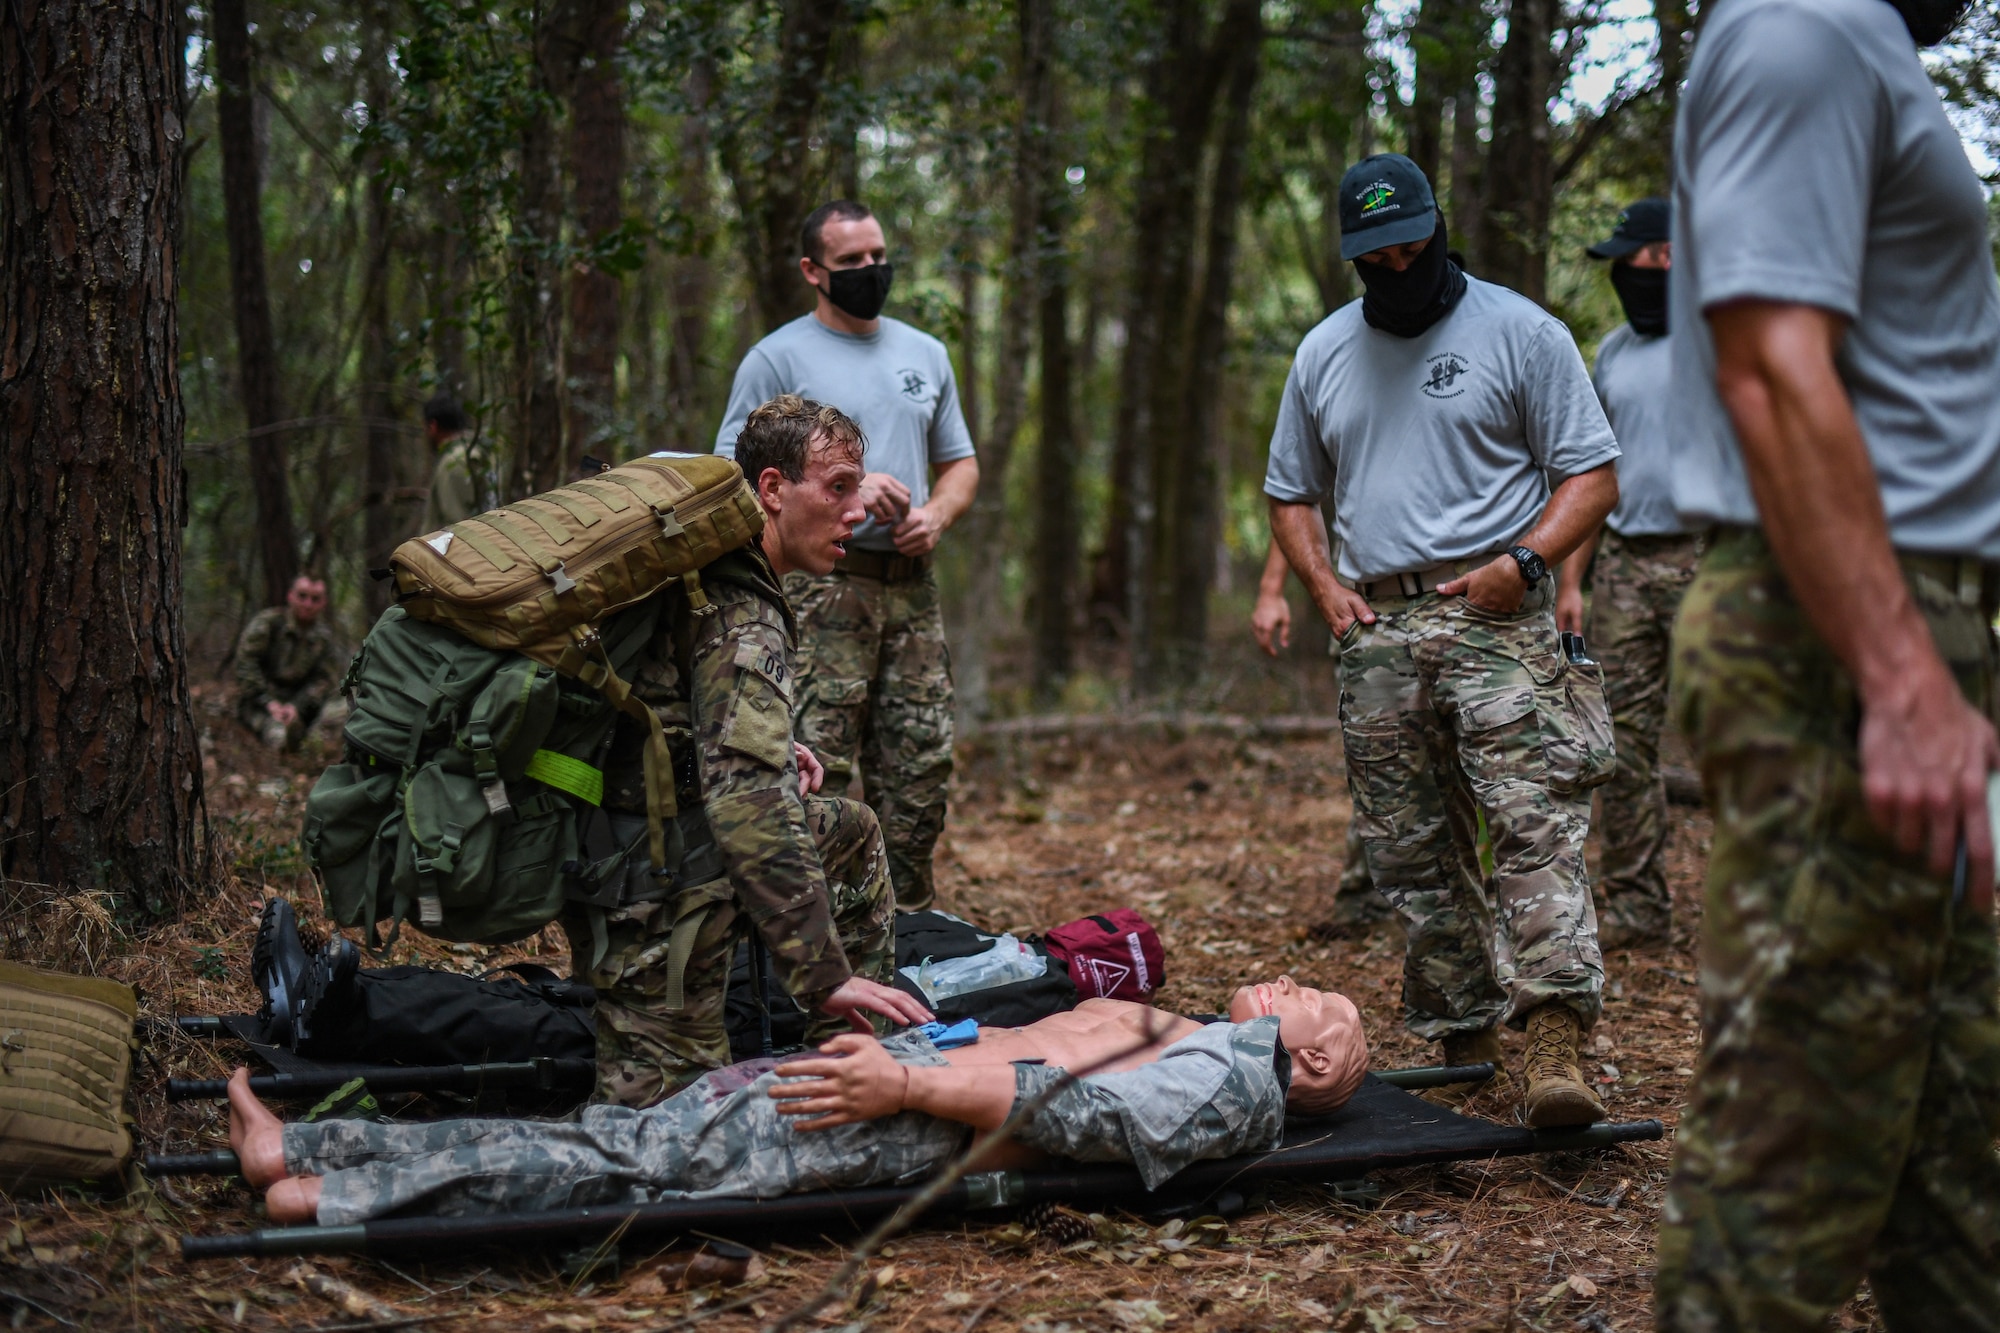 Special Operations Surgical Team candidates participate in a medical scenario providing emergency medical assistance to a subject on the leaf-covered ground in a woods